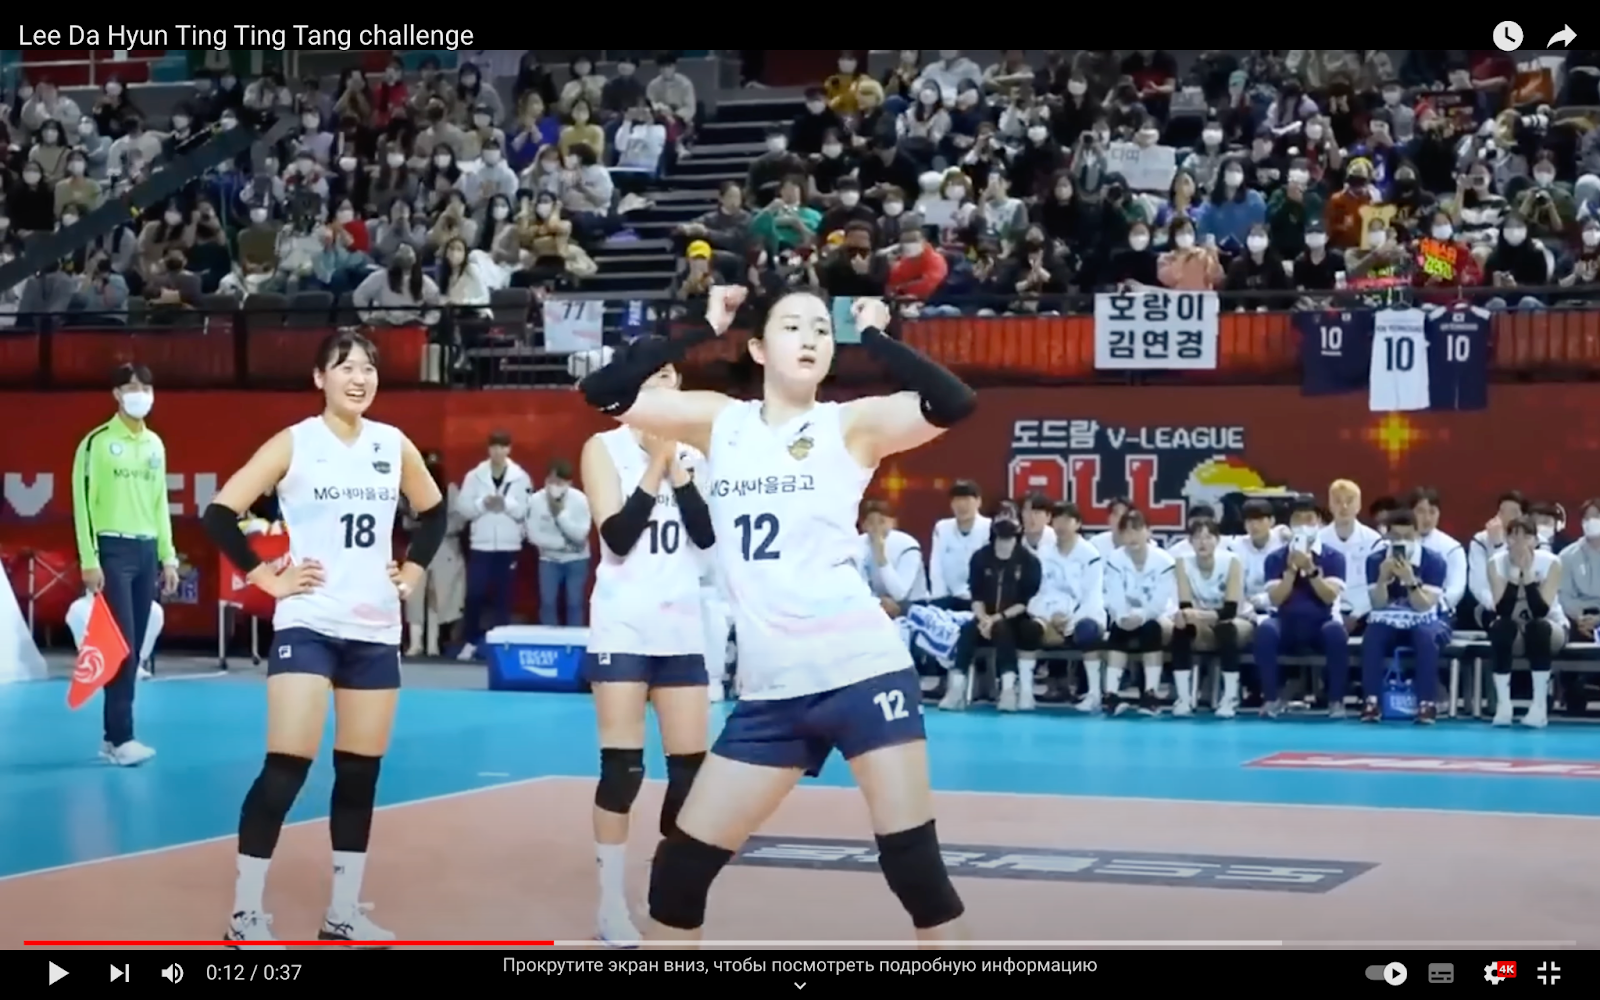 Girl dancing on the volleyball court